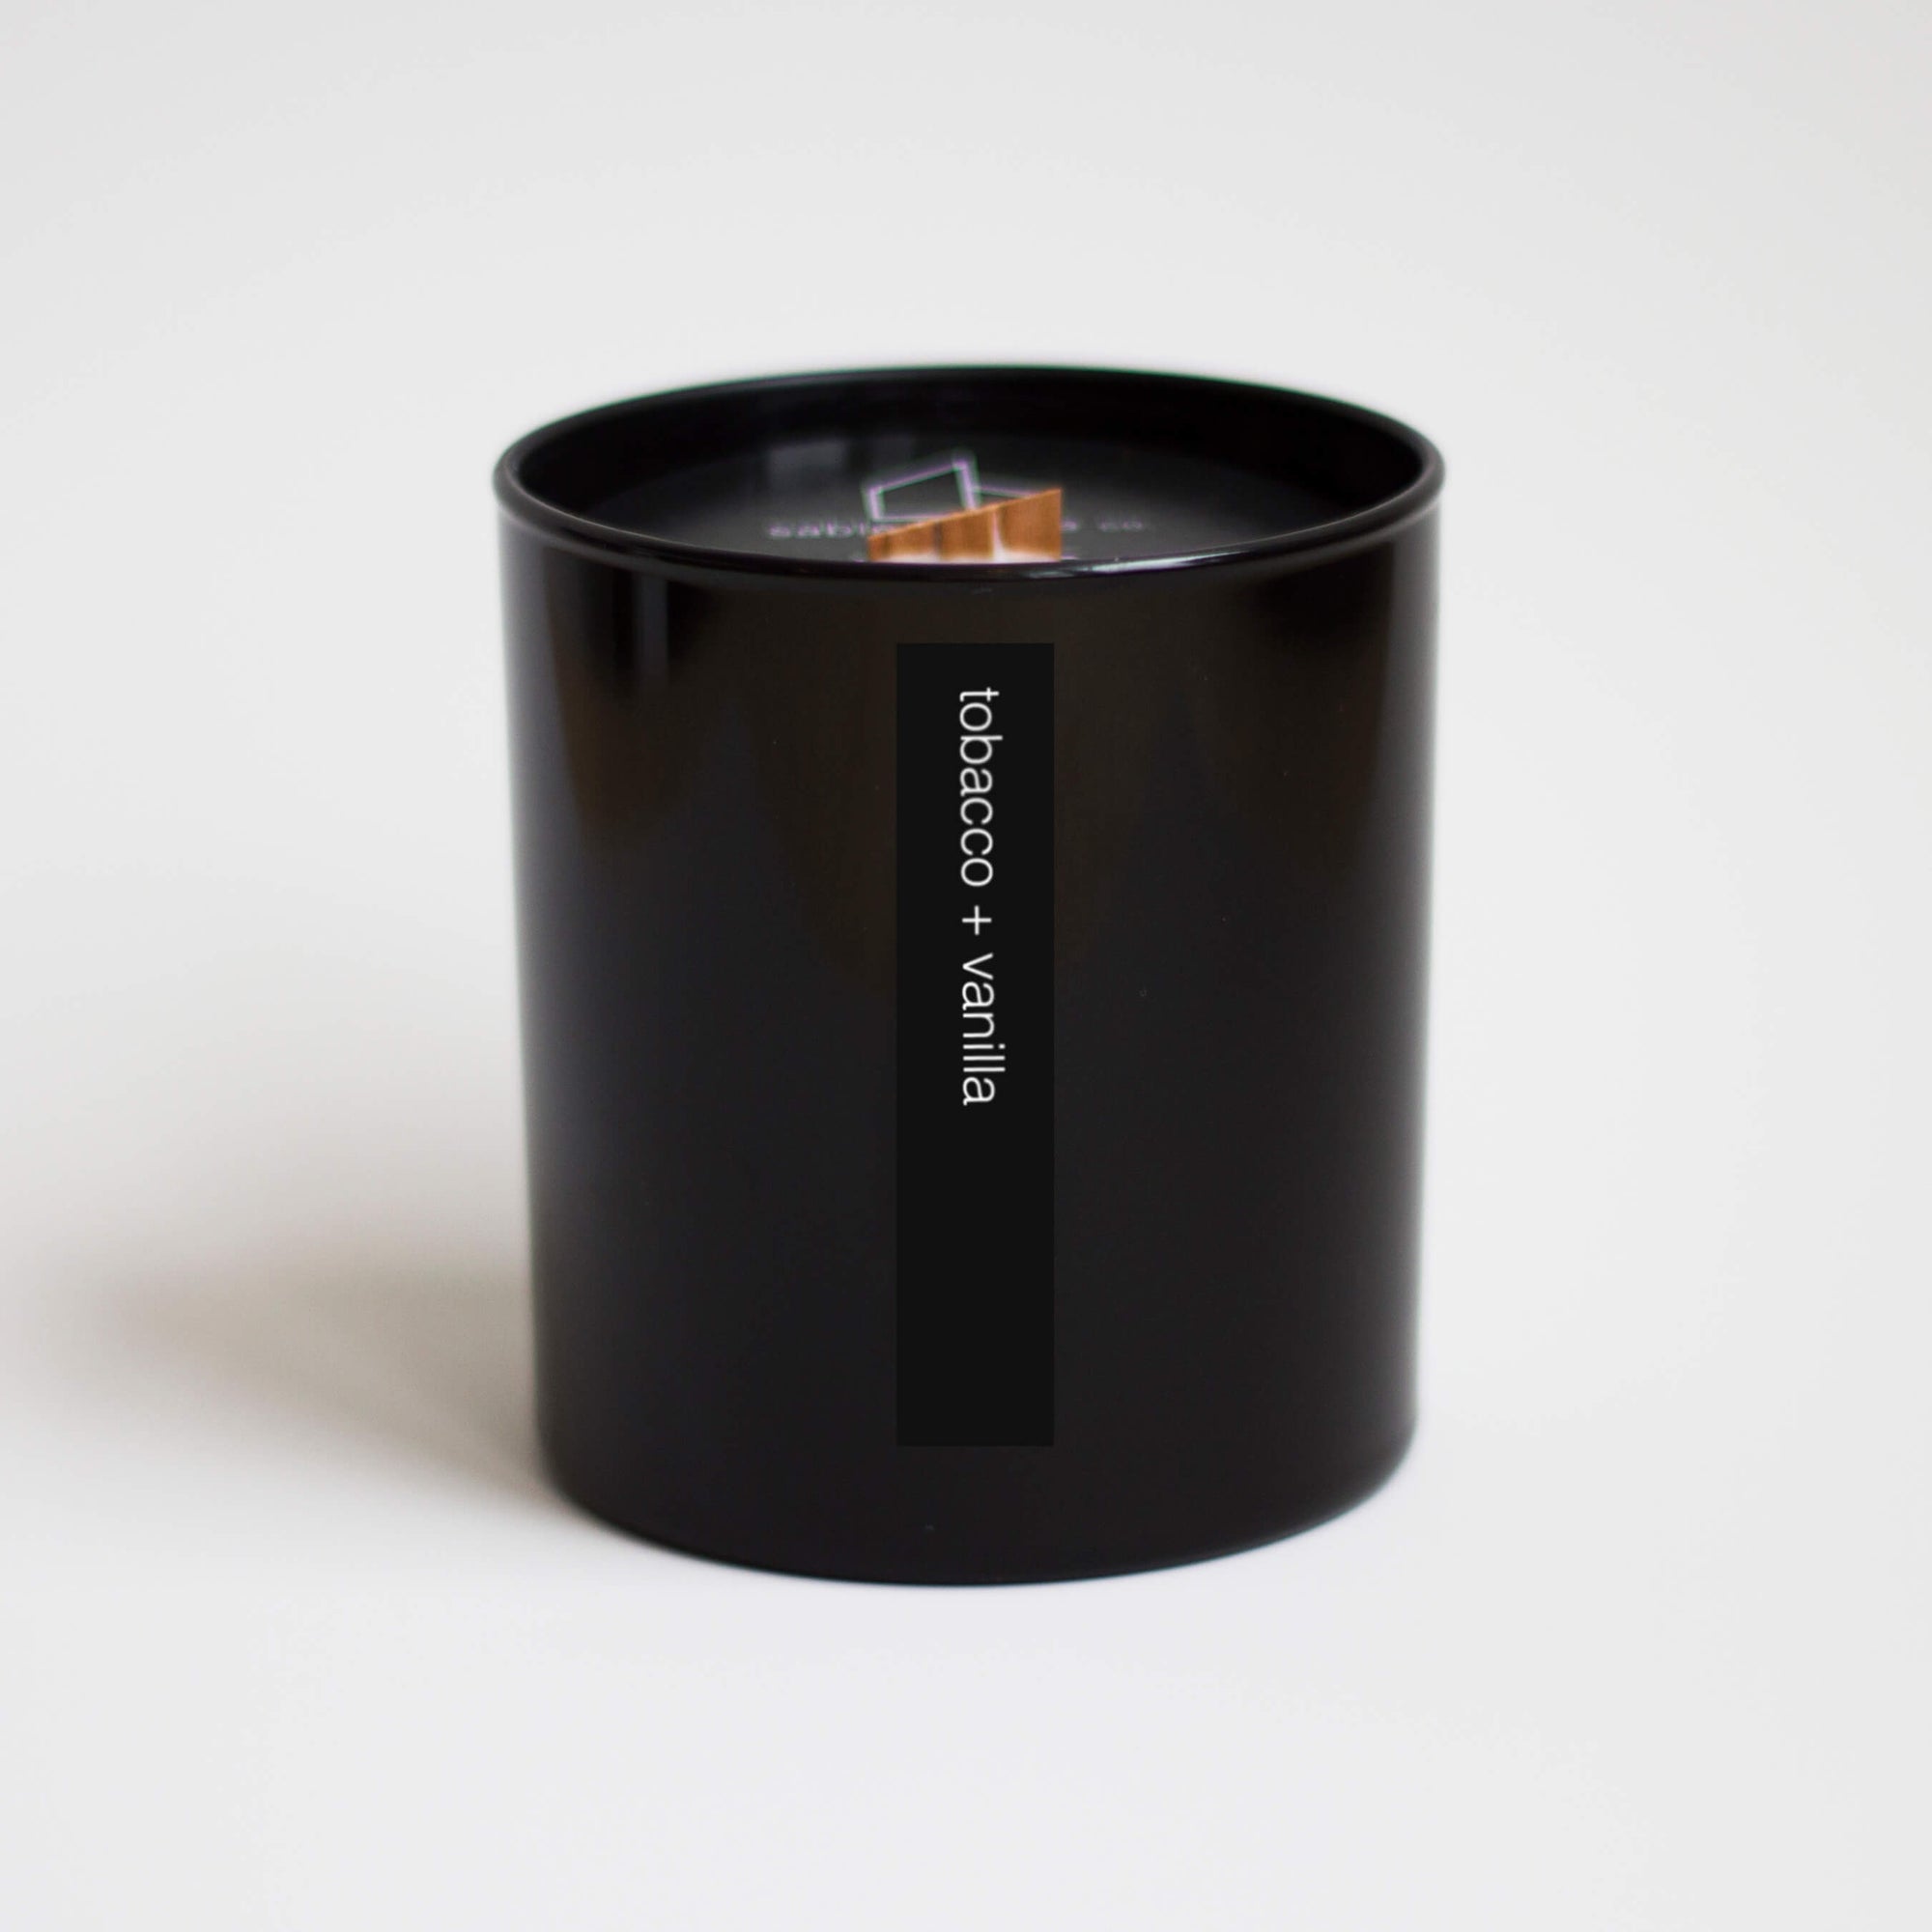 Tall black container holding beige candle with wood wick. Words on outside read "tobacco + vanilla".